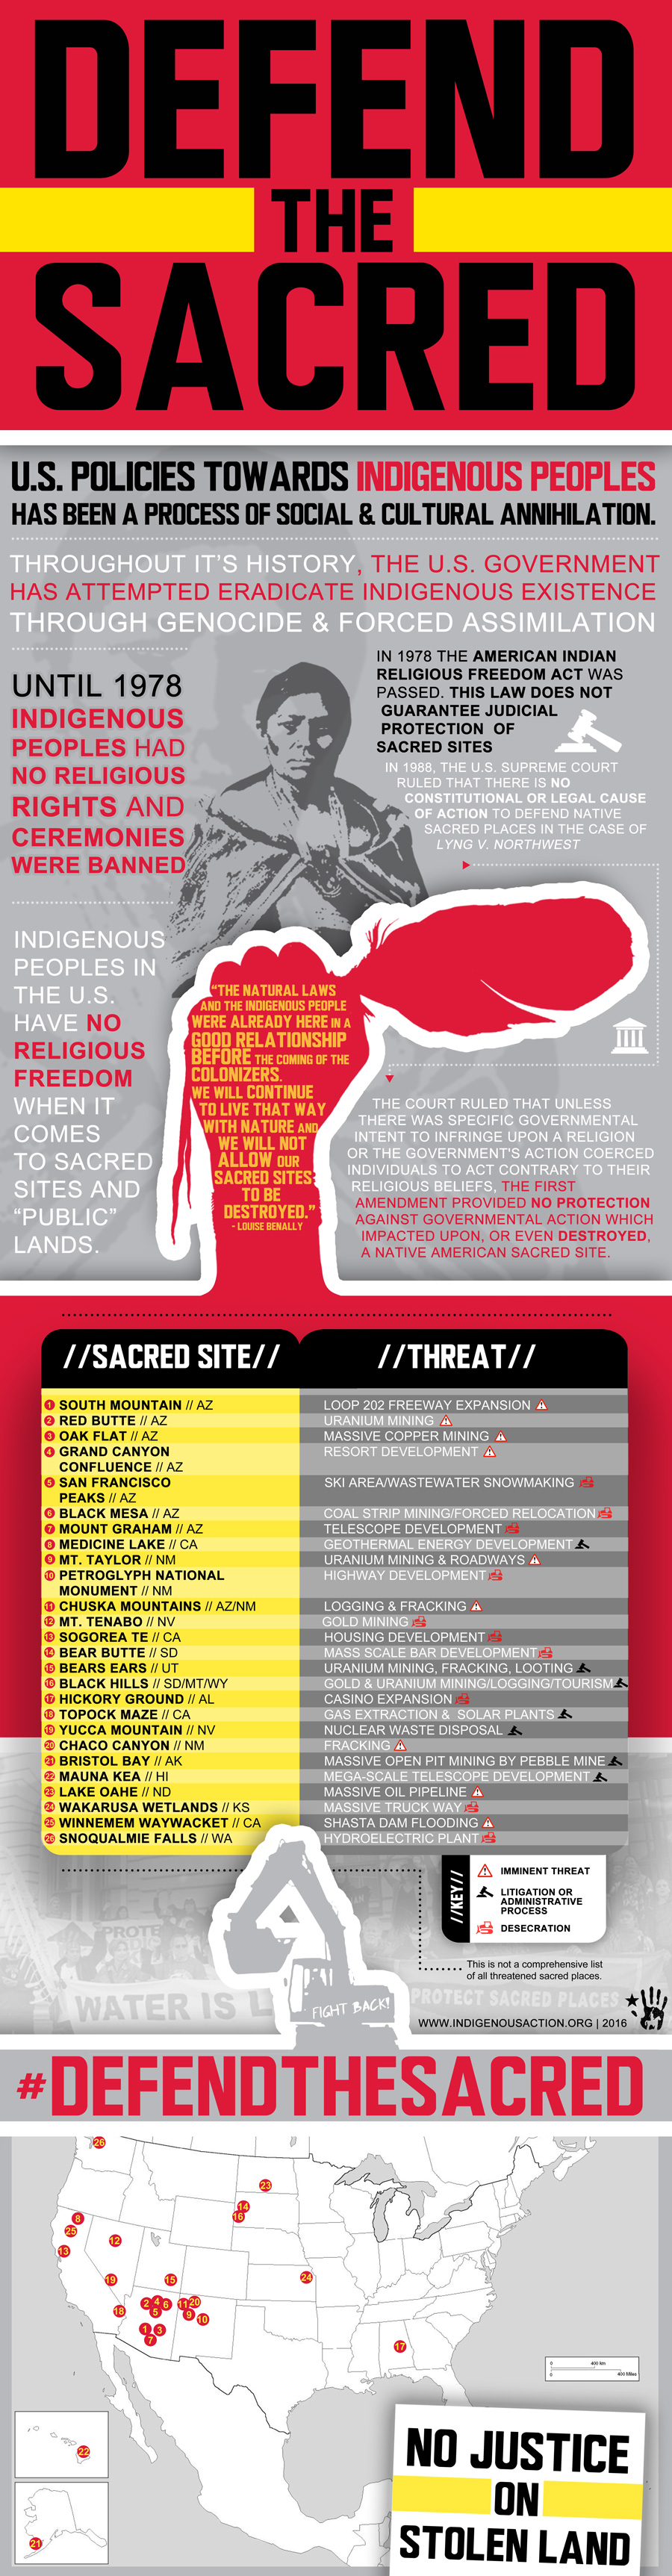 sacred-sites-defend-the-sacred-infographic